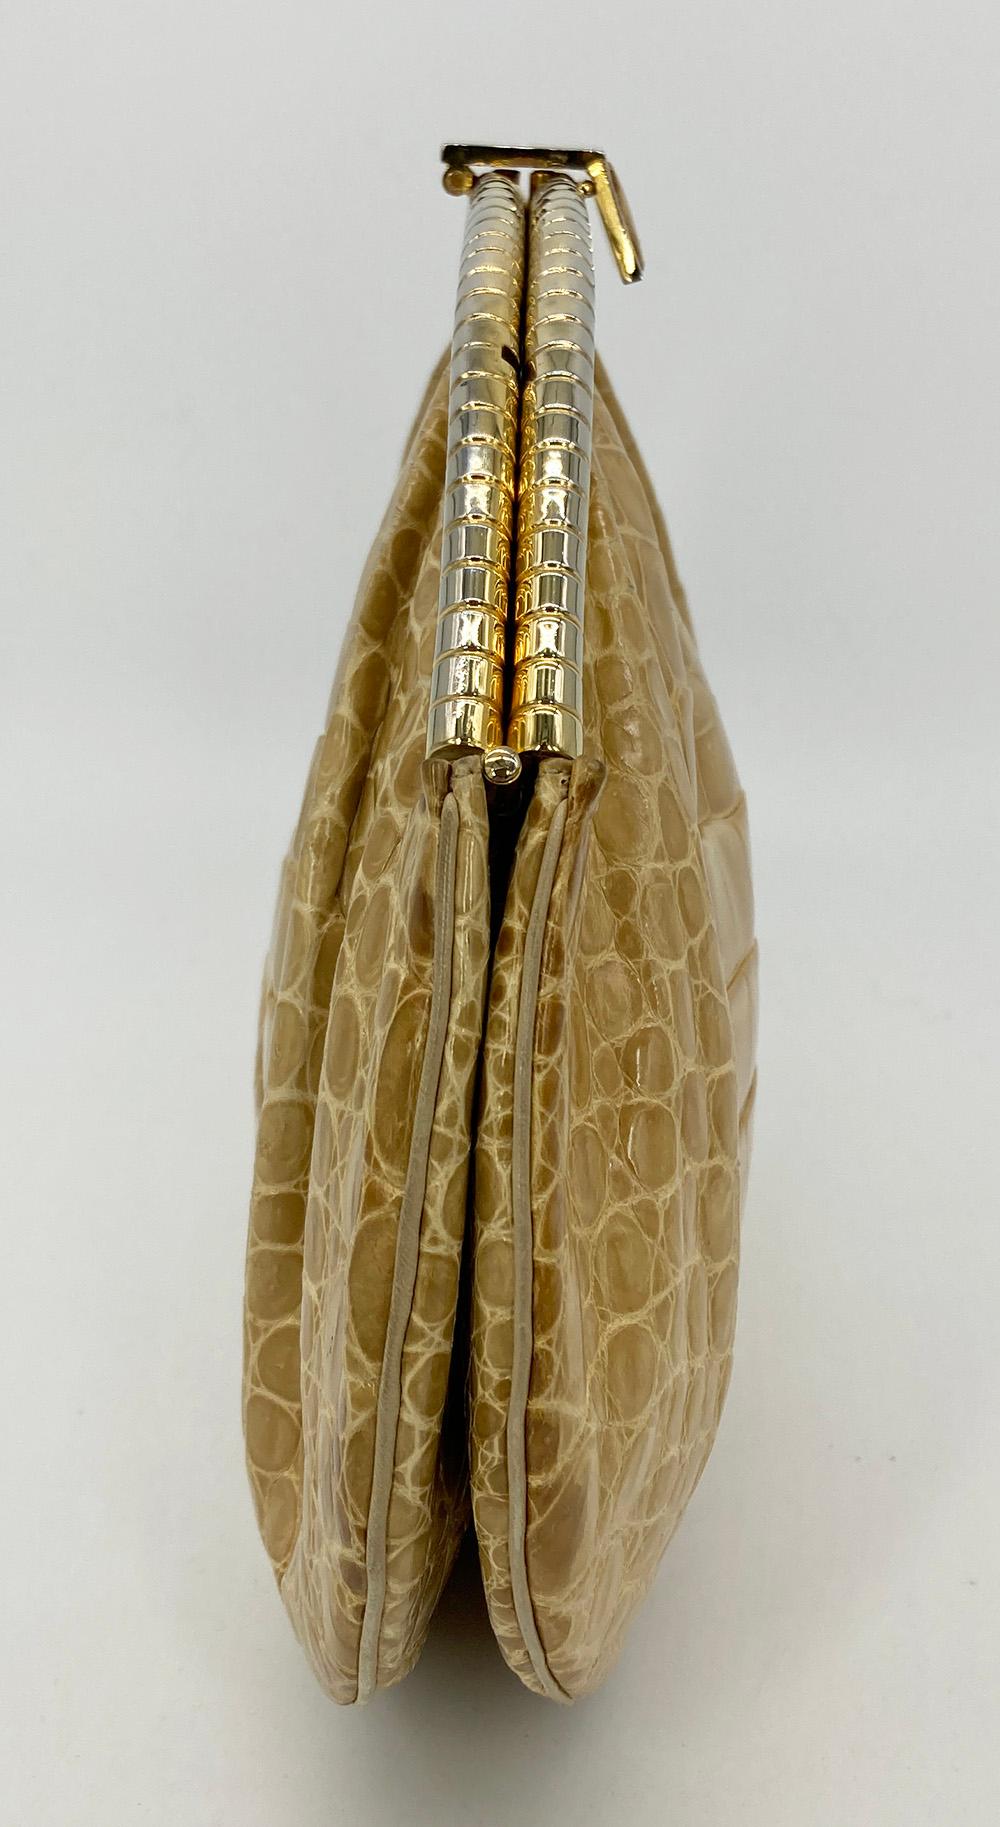 Judith Leiber Tan Alligator Clutch in good condition. Tan alligator exterior trimmed with gold hardware along top edge. Top center lift latch closure opens  via 4 hinges to a tan leather lined interior with one slit an done zip side pockets and